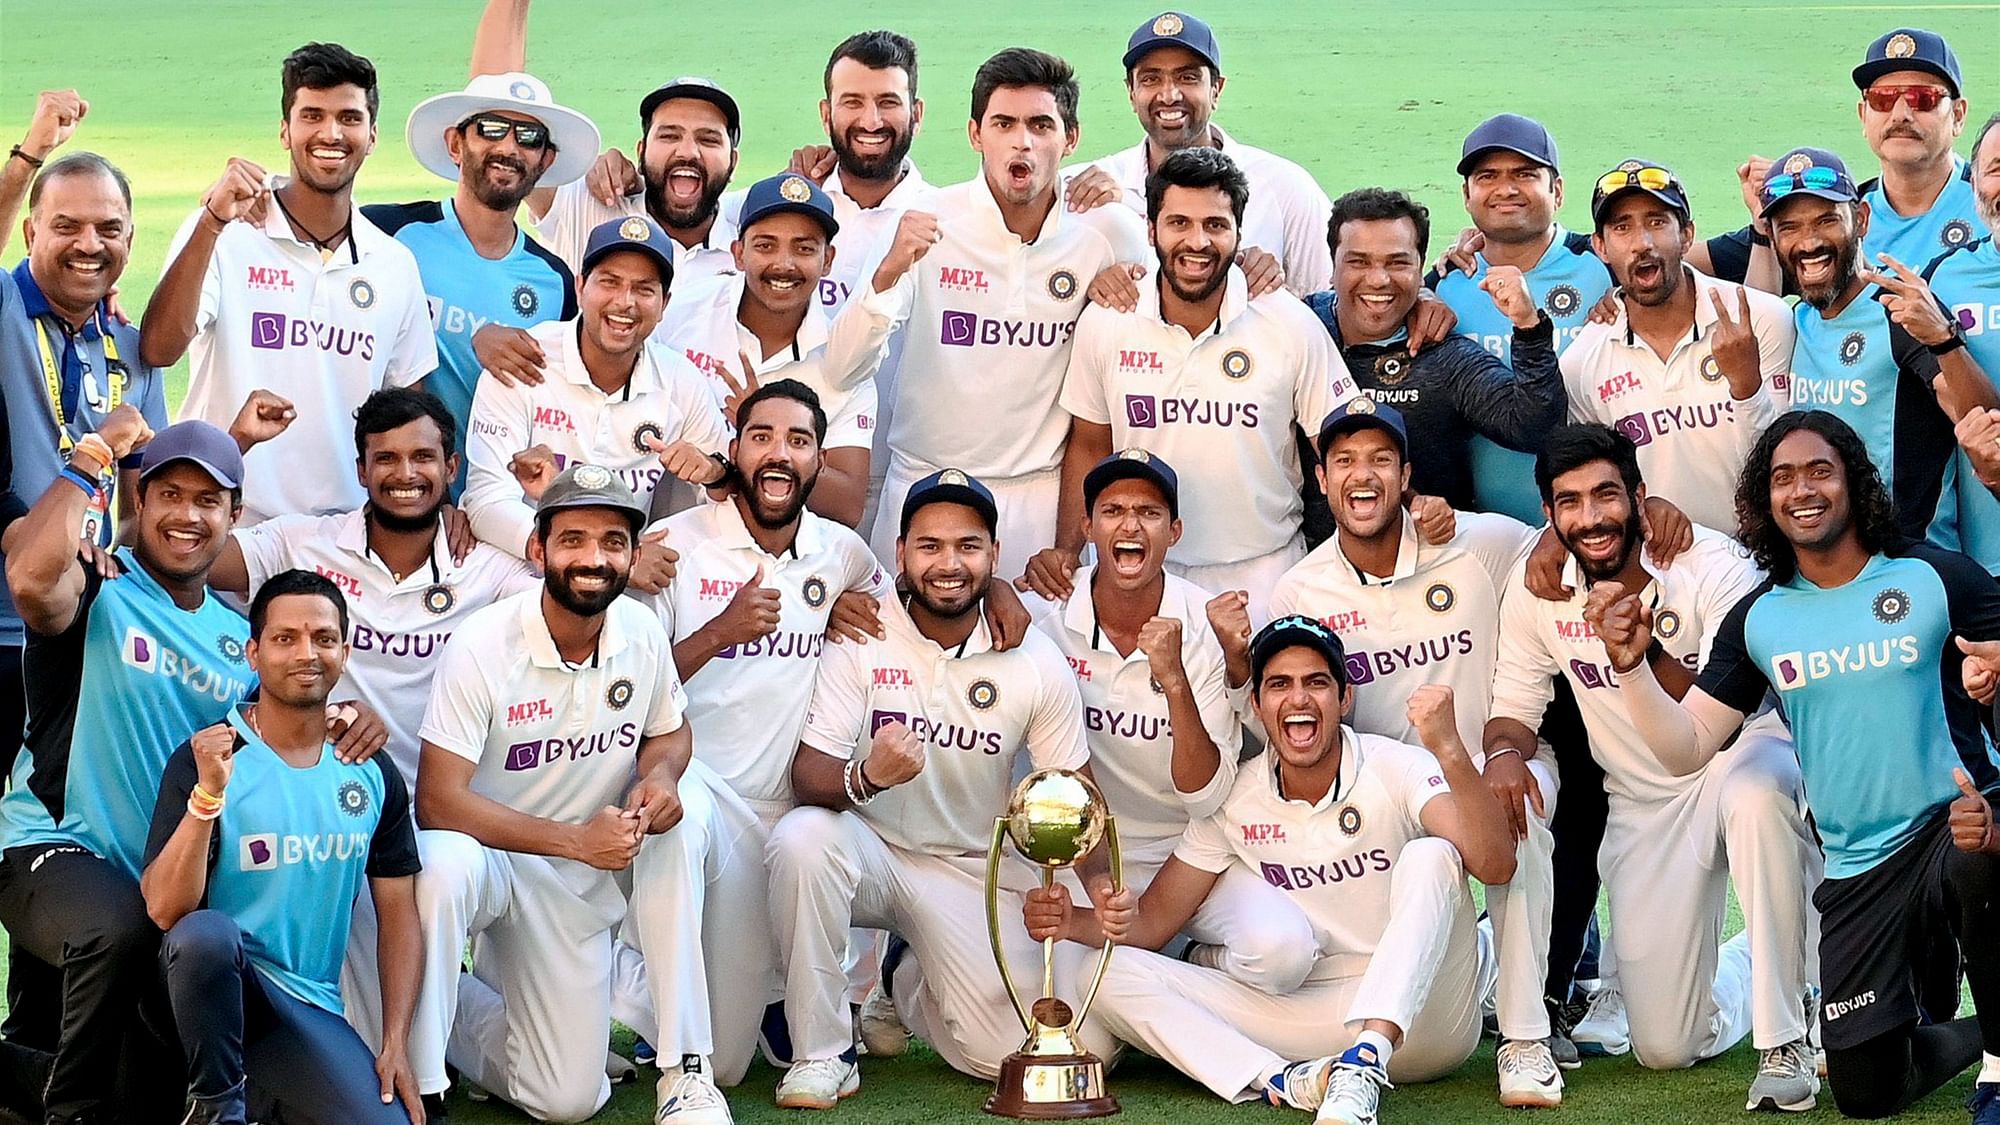 Indian players pose with the winning trophy after defeating Australia by three wickets on the final day of the fourth cricket test match at the Gabba, Brisbane, Australia.